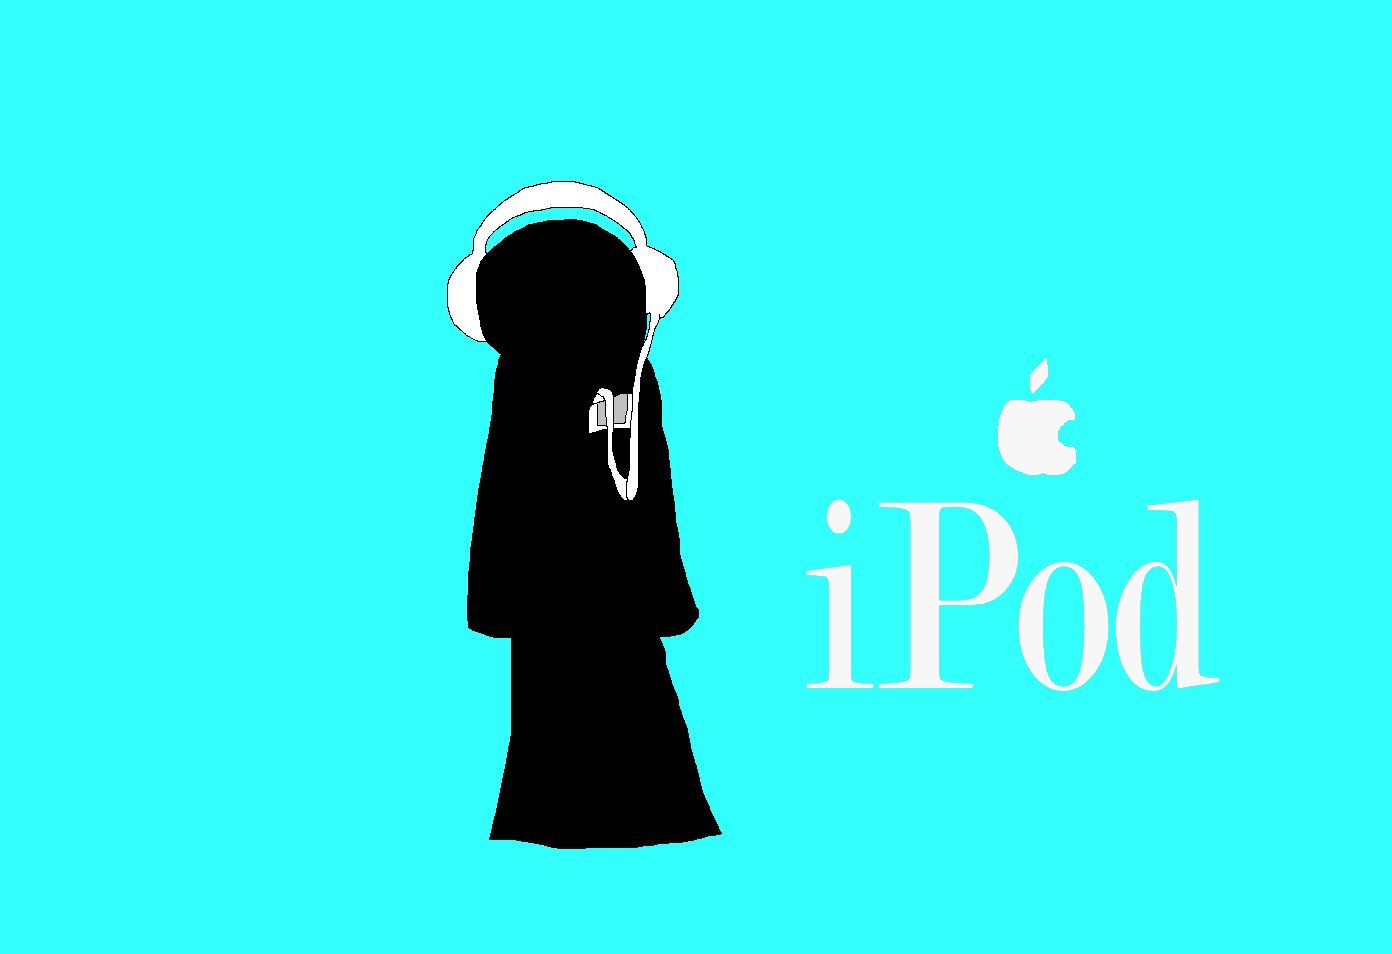 ipod series 4 by CrAzY_fish101